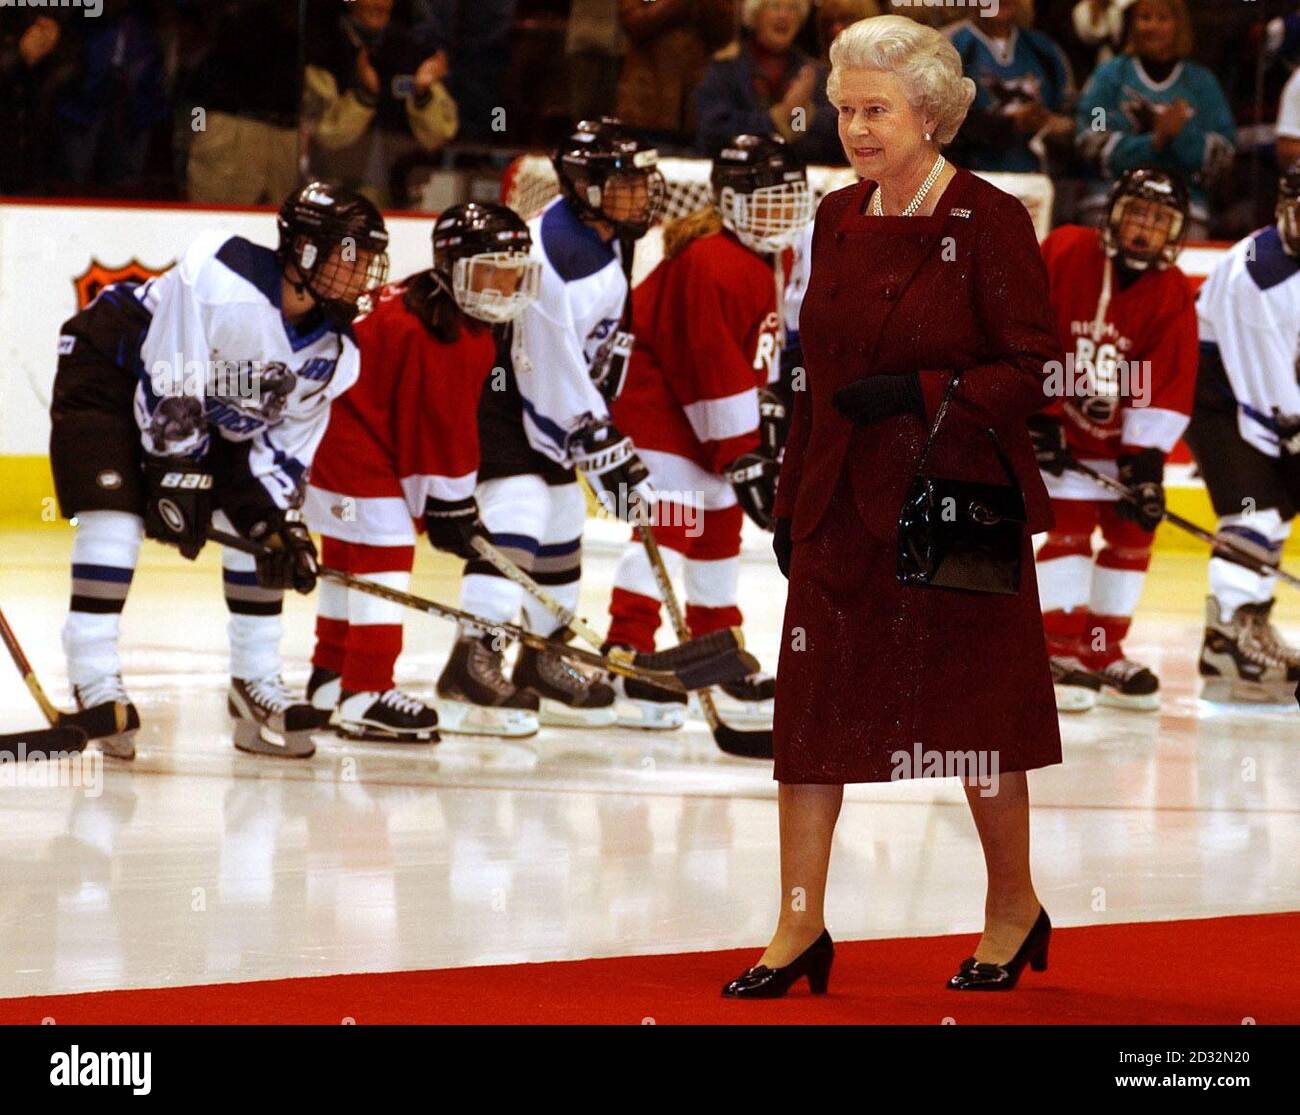 Britain's Queen Elizabeth II walks onto the ice rink on a red carpet before she starts an ice hockey game between San Jose Sharks and Vancouver Canucks in Vancouver, Canada, during her two week Golden Jubilee tour of the country.  *...The Queen, and her husband, the Duke of Edinburgh, went to church at Christ Church Cathedral in Victoria followed by lunch at the Fairmont Empress Hotel where the royal couple were greeted by the Pipes and Drums of the Canadian Scottish Regiment.   Stock Photo